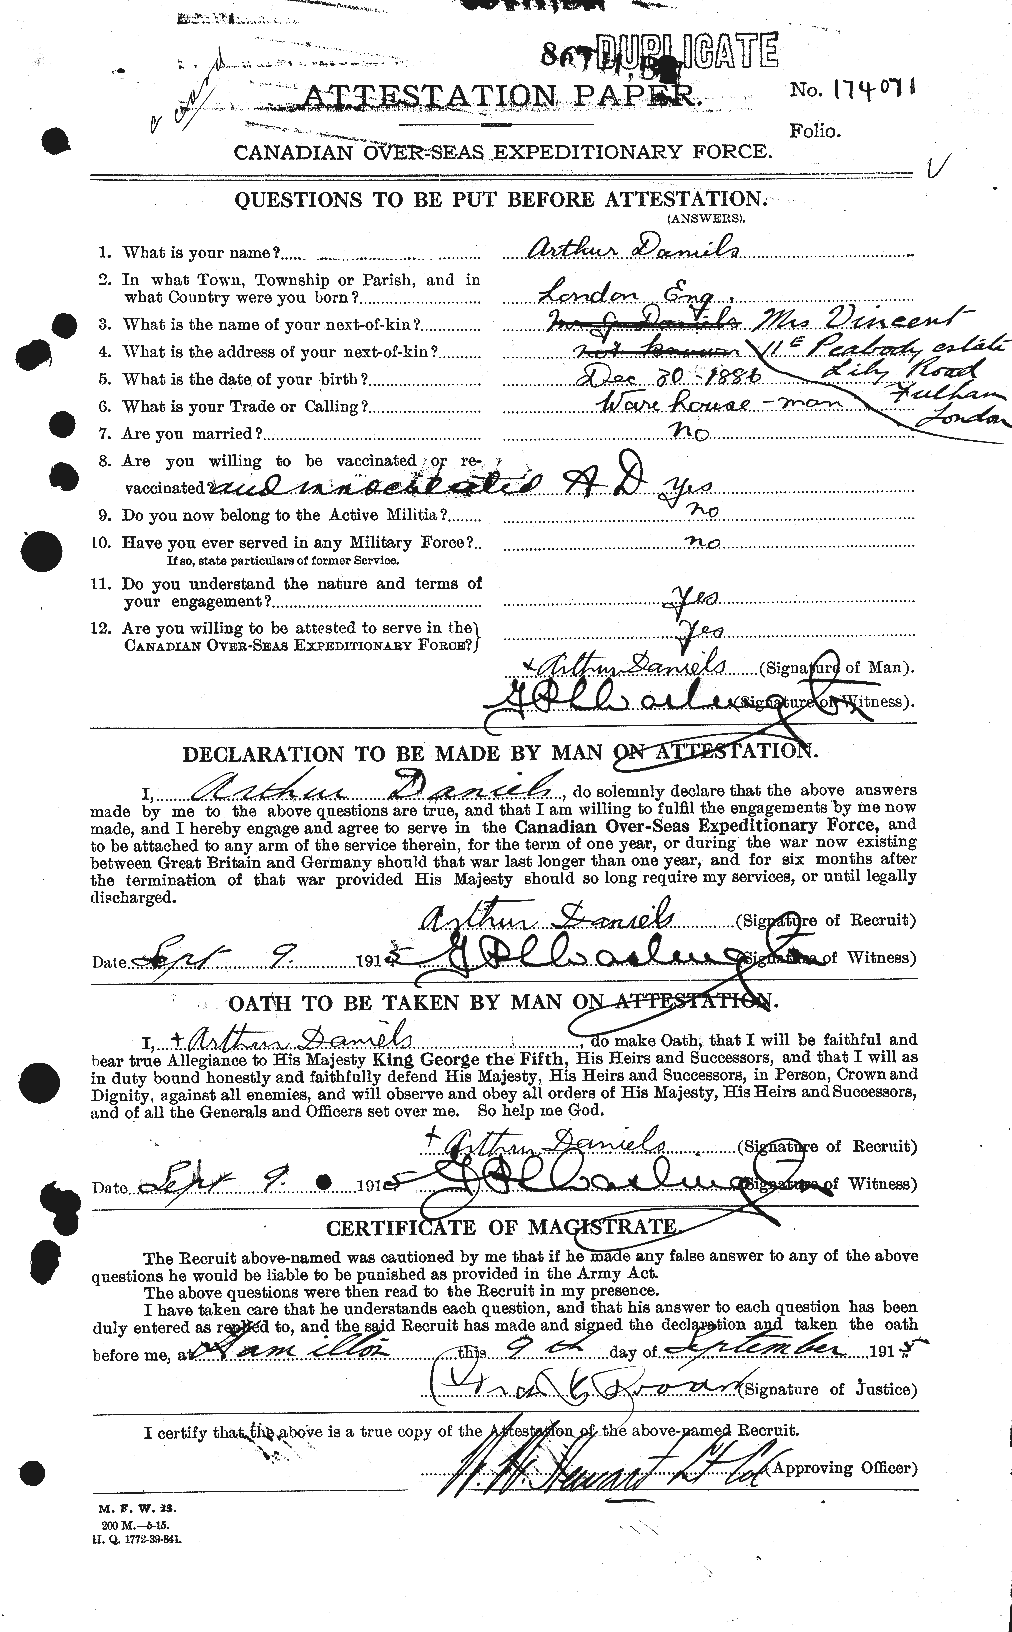 Personnel Records of the First World War - CEF 279569a